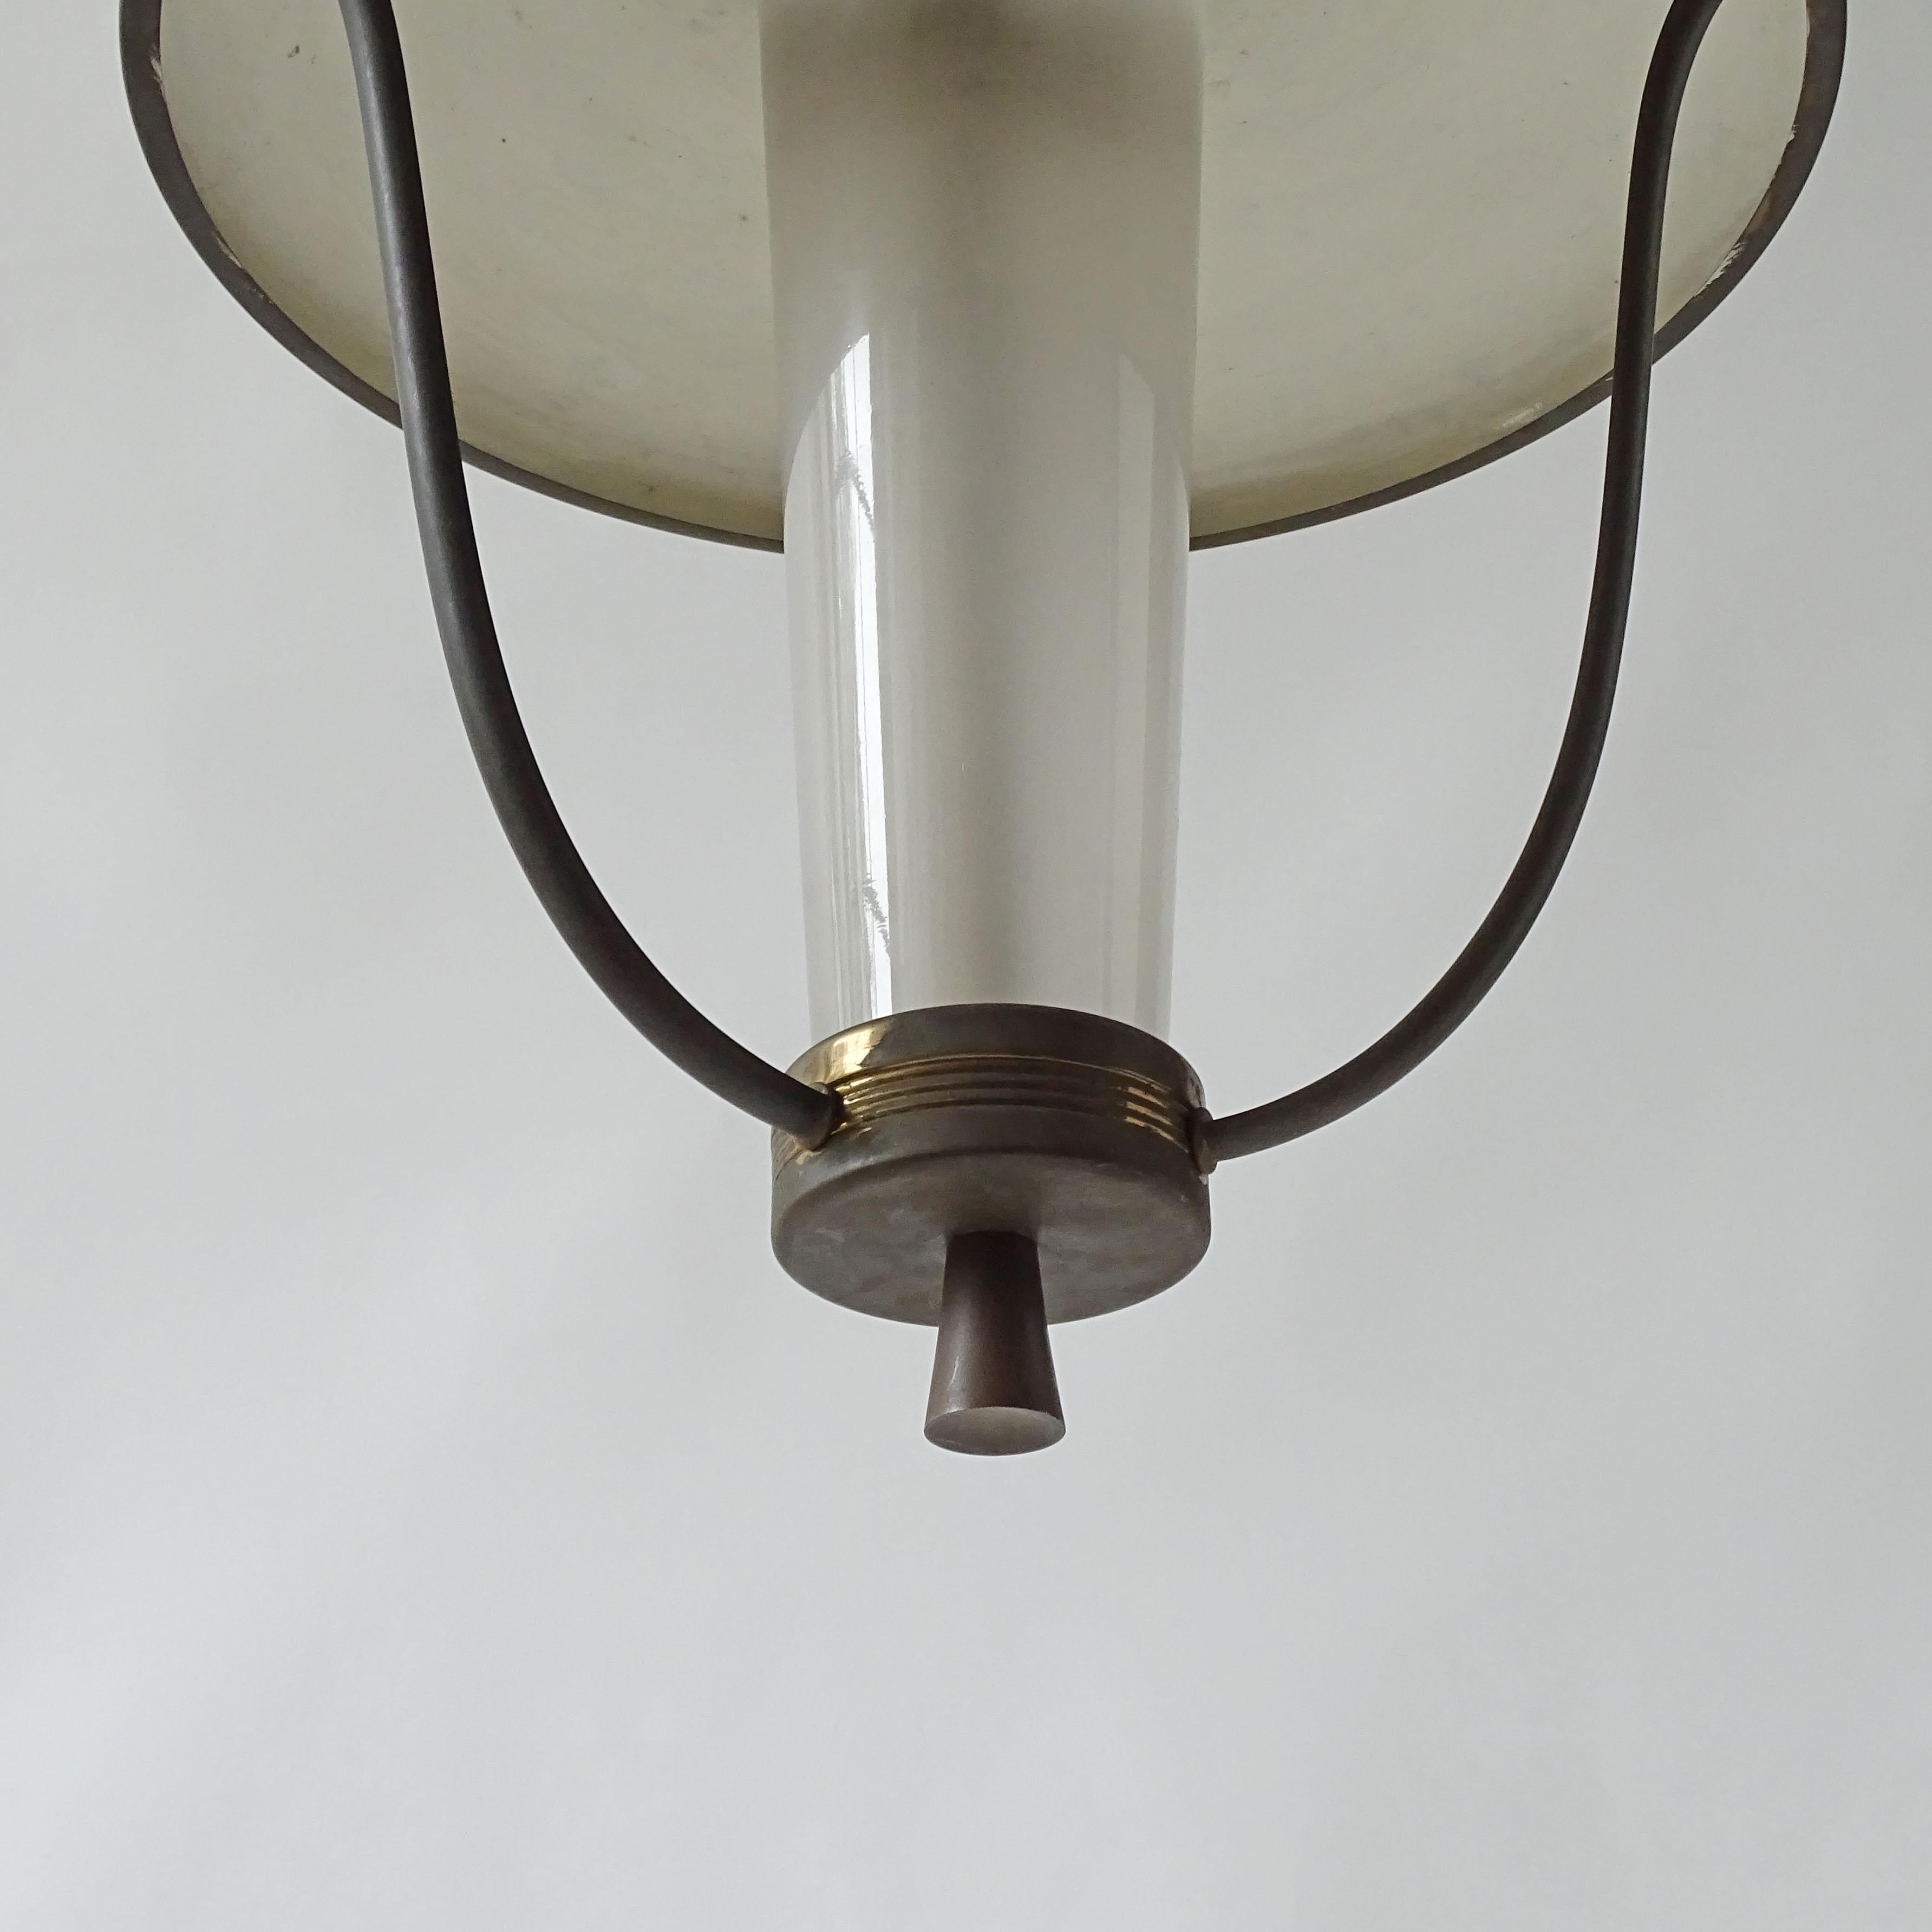 Mid-20th Century Monumental Guglielmo Ulrich Ceiling Lamp in Brass and Glass, Italy 1940s For Sale